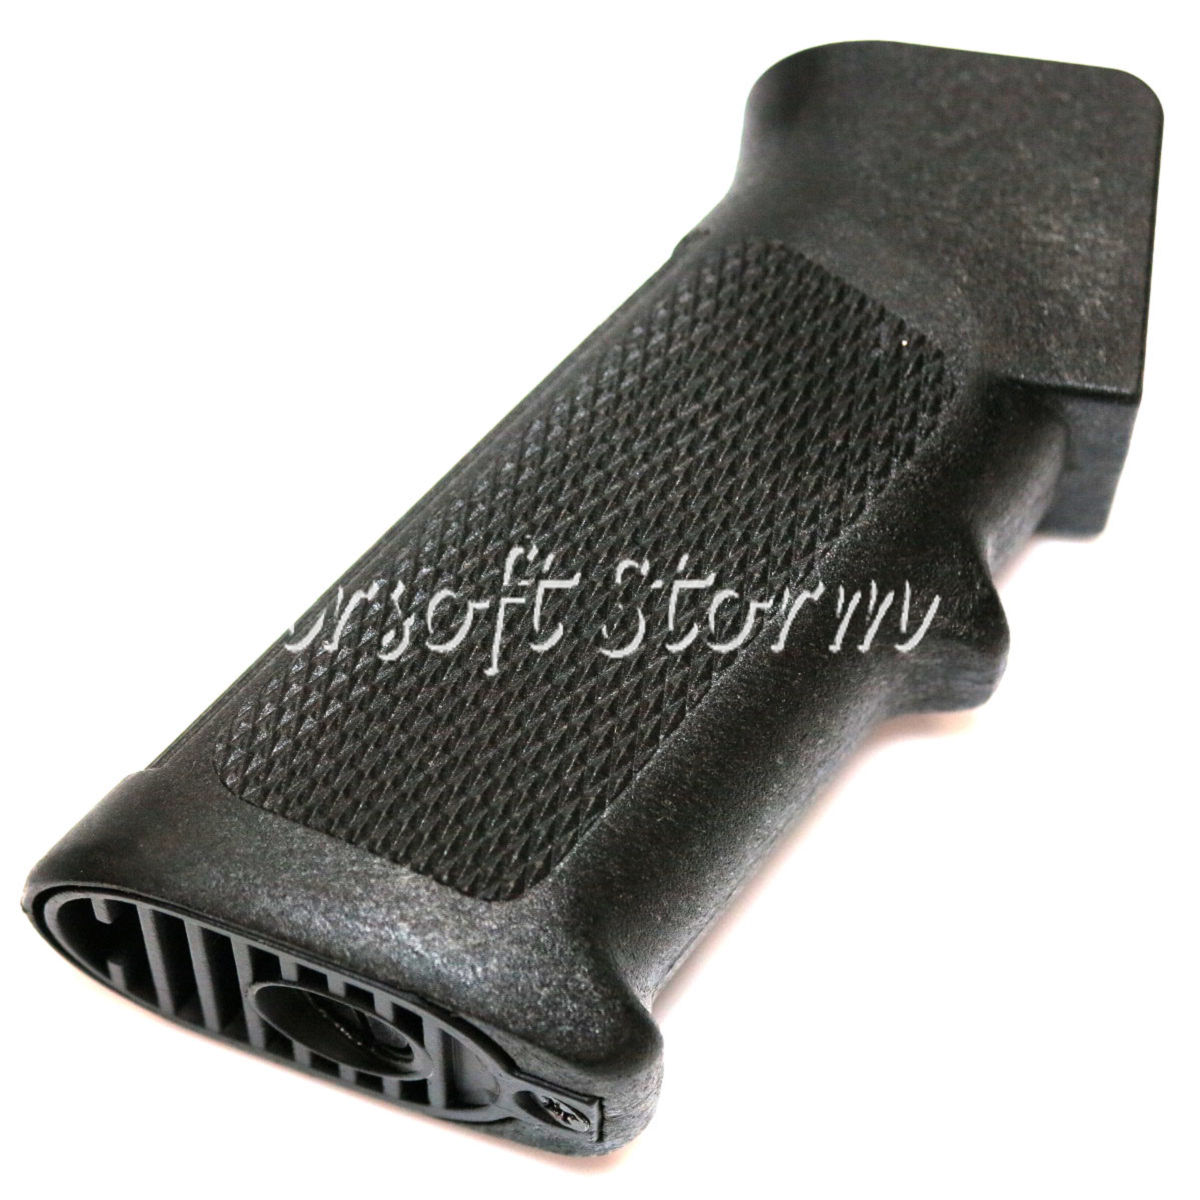 Airsoft Tactical Gear D-Boys M16A2 Pistol Grip for M4/M16 AEG Black - Click Image to Close